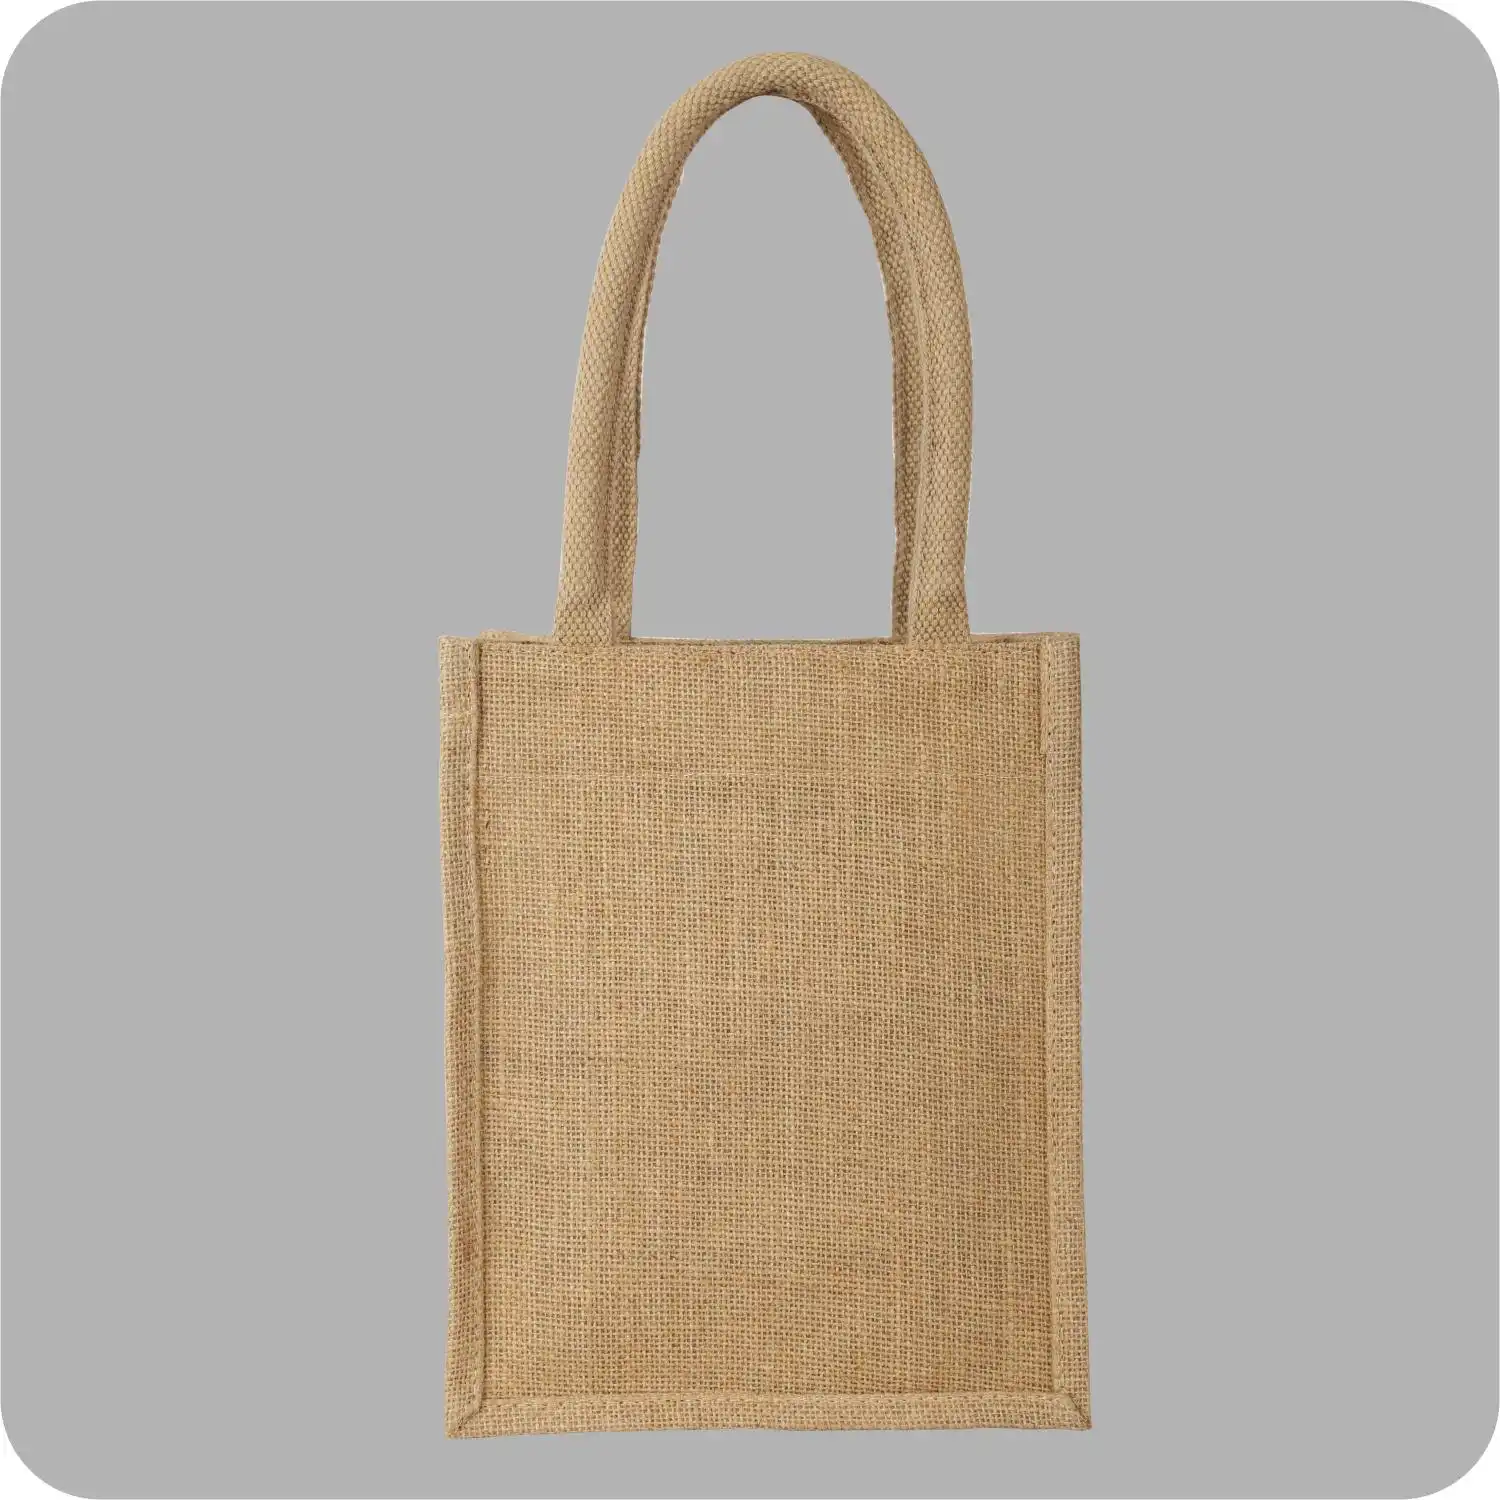 8X10X5 Inches Robust Jute Bags at Affordable Price 